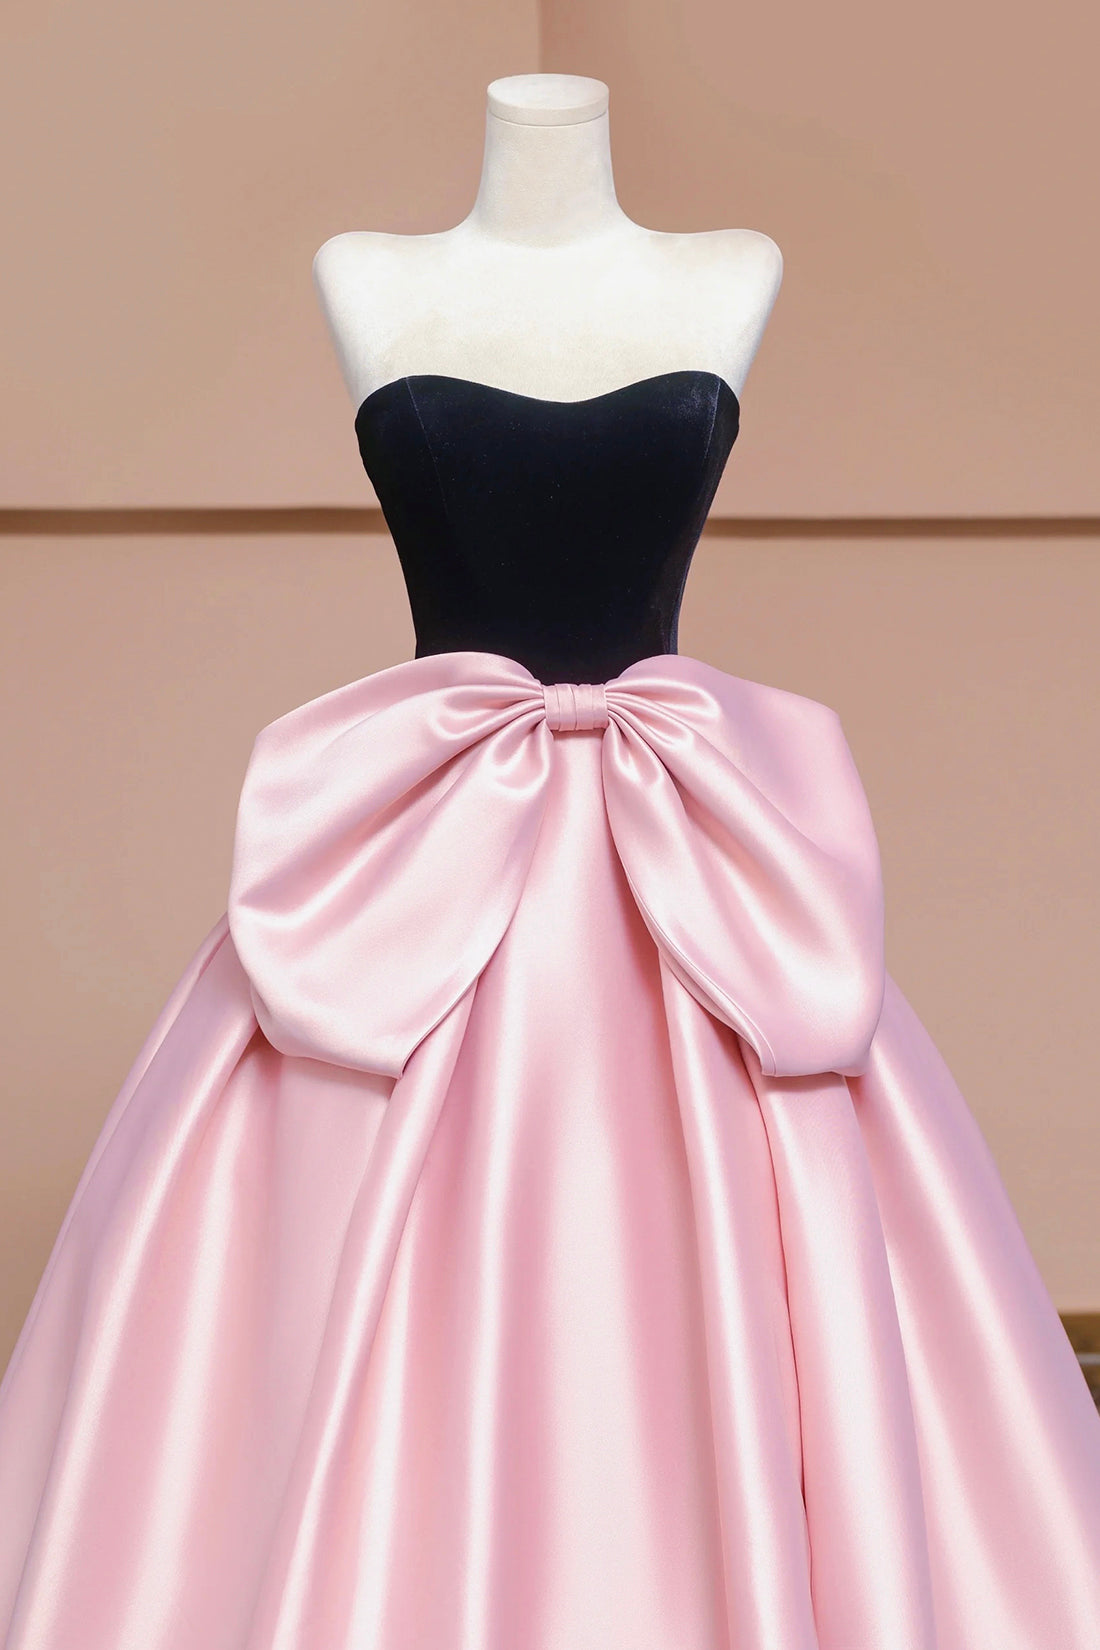 Black Velvet and Pink Satin Long Prom Dress, A-Line Strapless Evening Party Dress